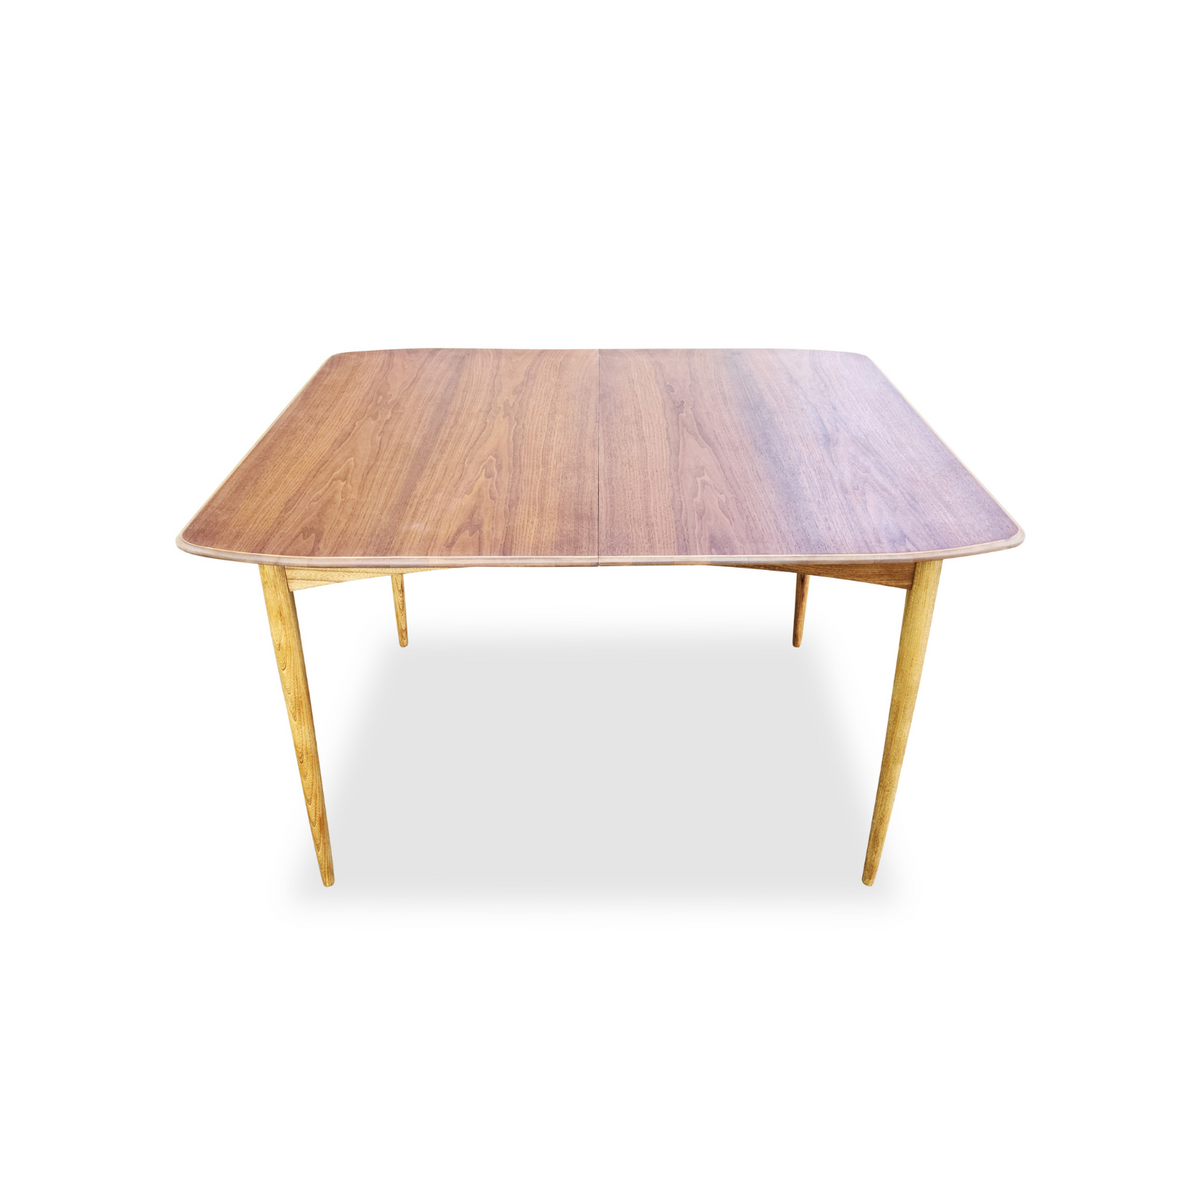 Walnut and Ash Dining Table by Deilcraft